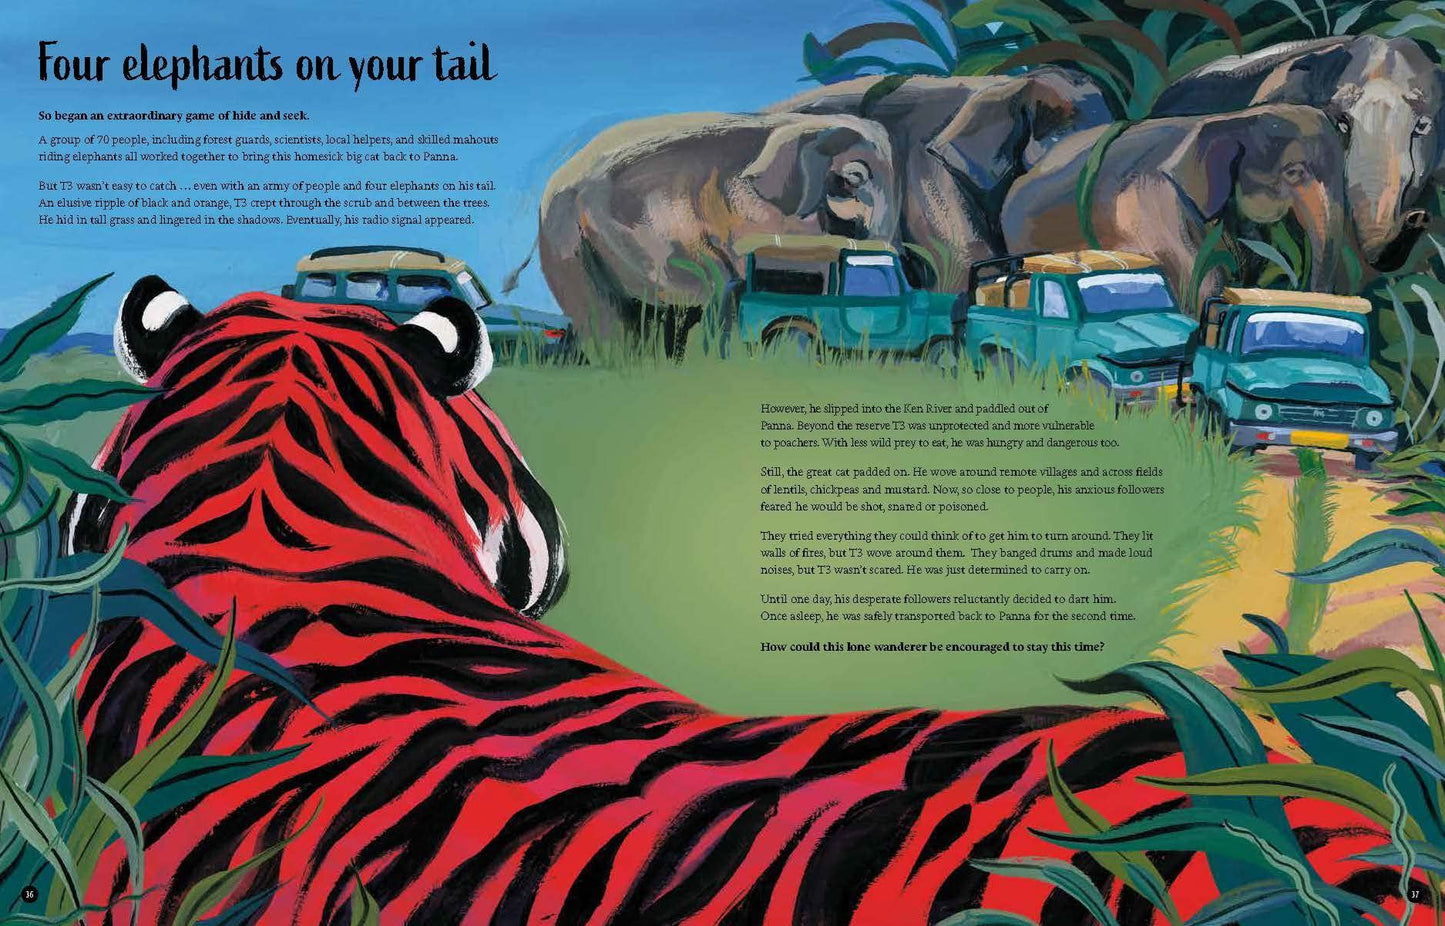 Tigers’ Tale: A Conservation Story (HB)